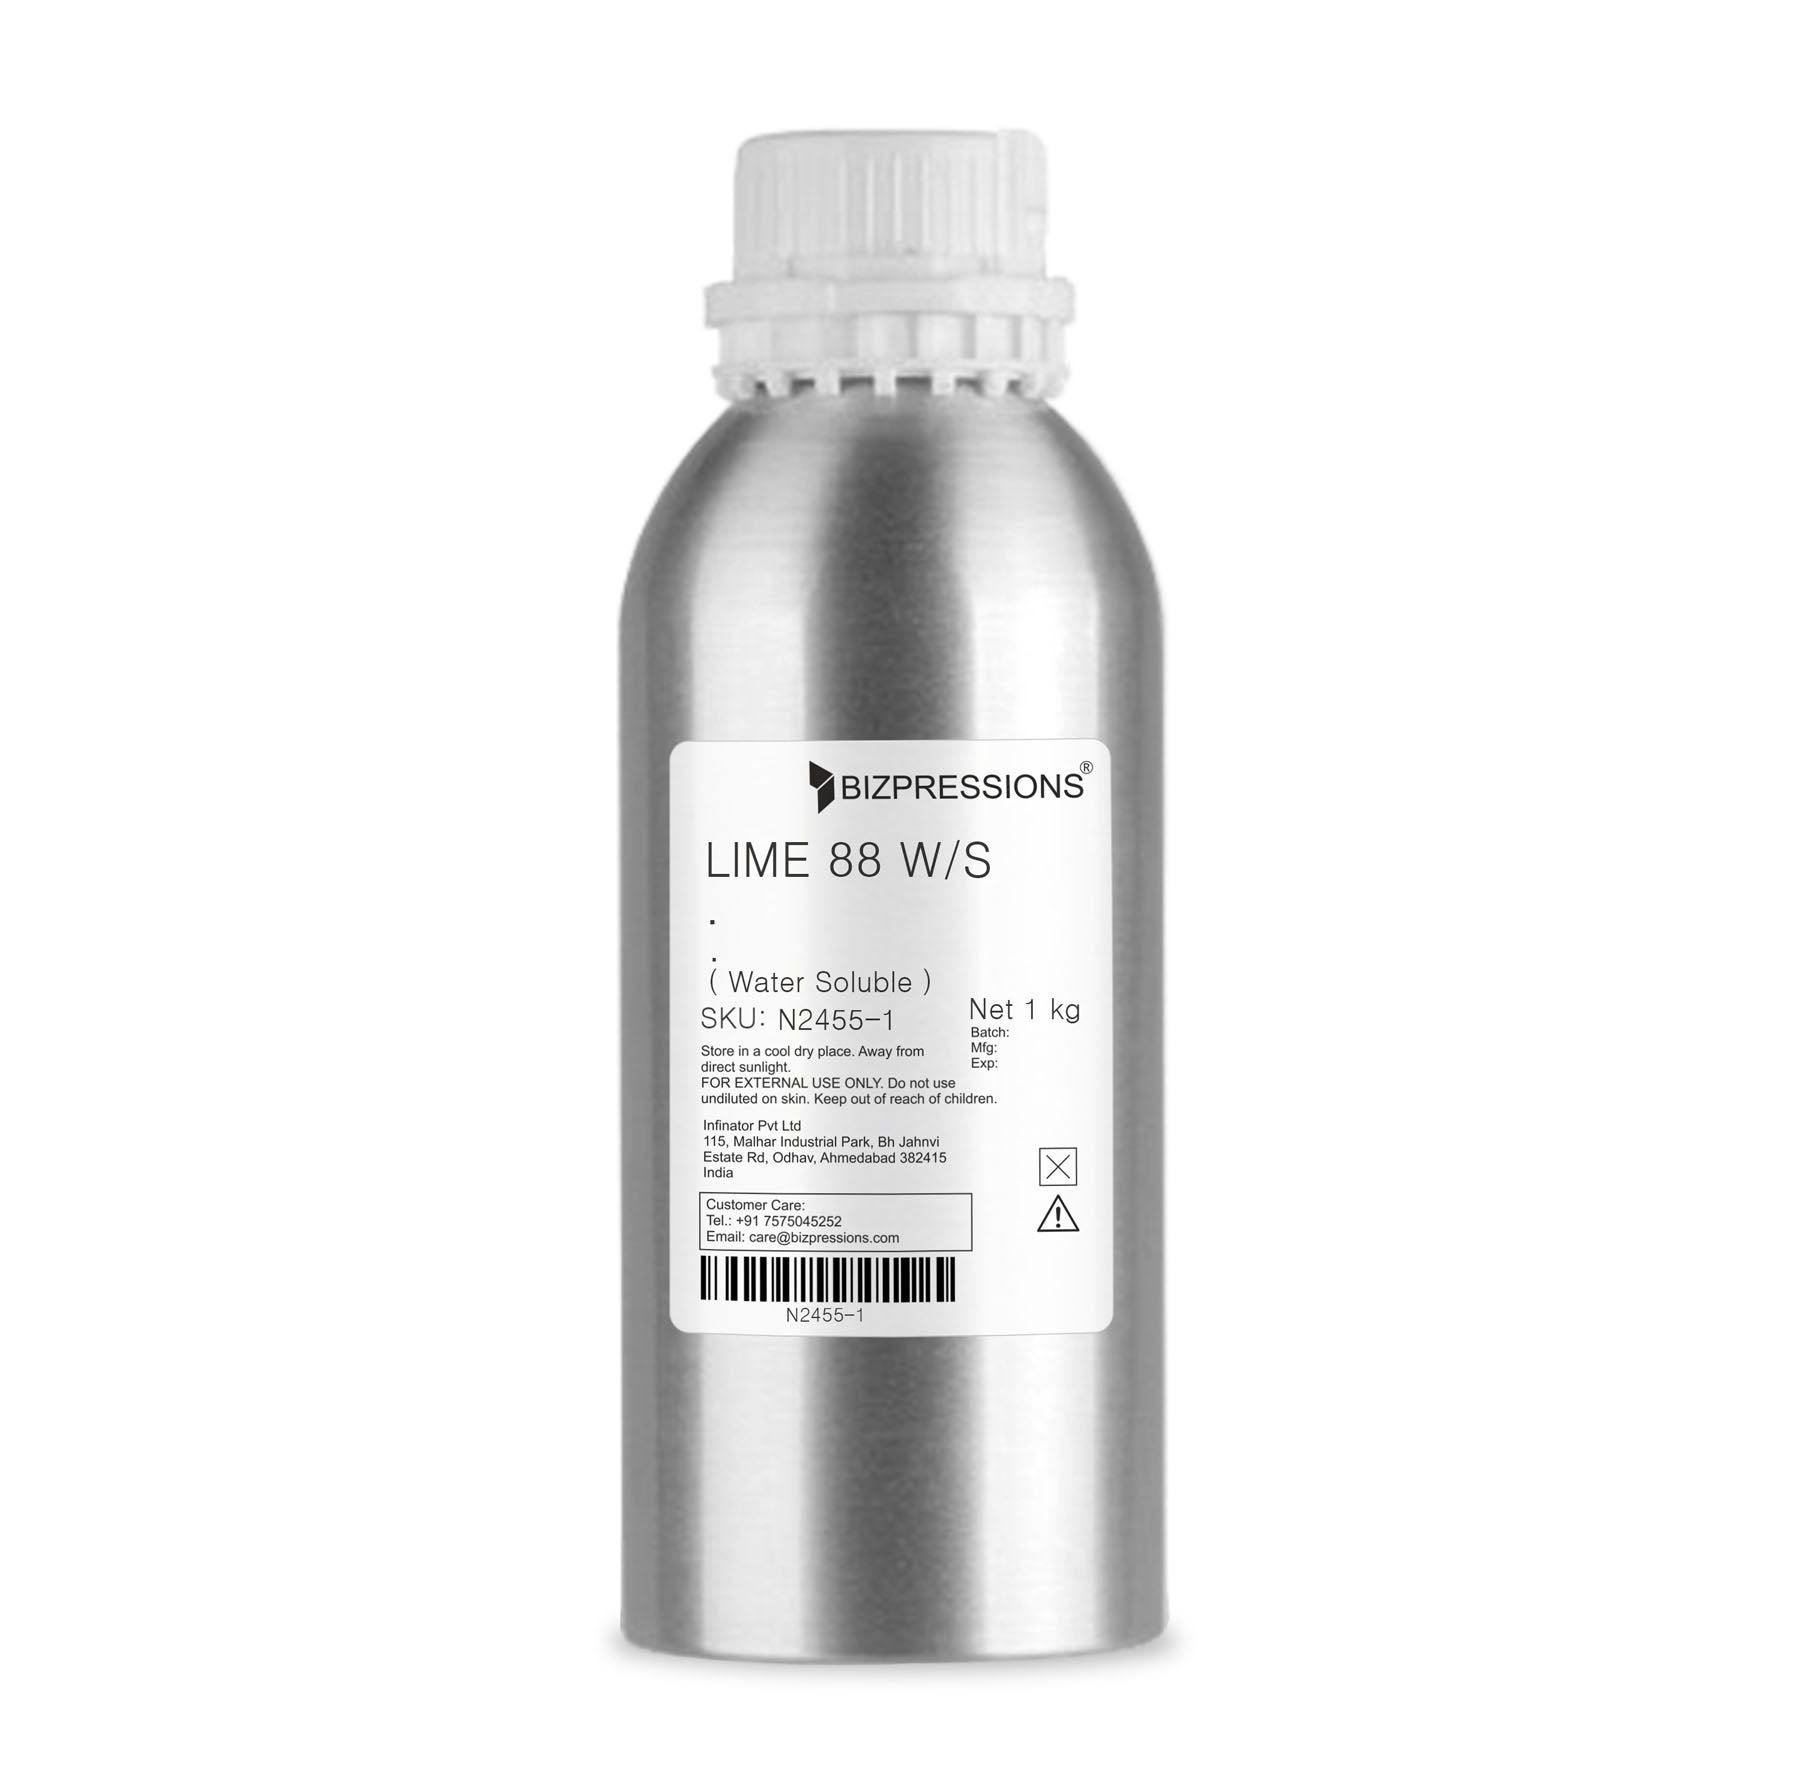 LIME 88 W/S - Fragrance ( Water Soluble ) - 1 kg